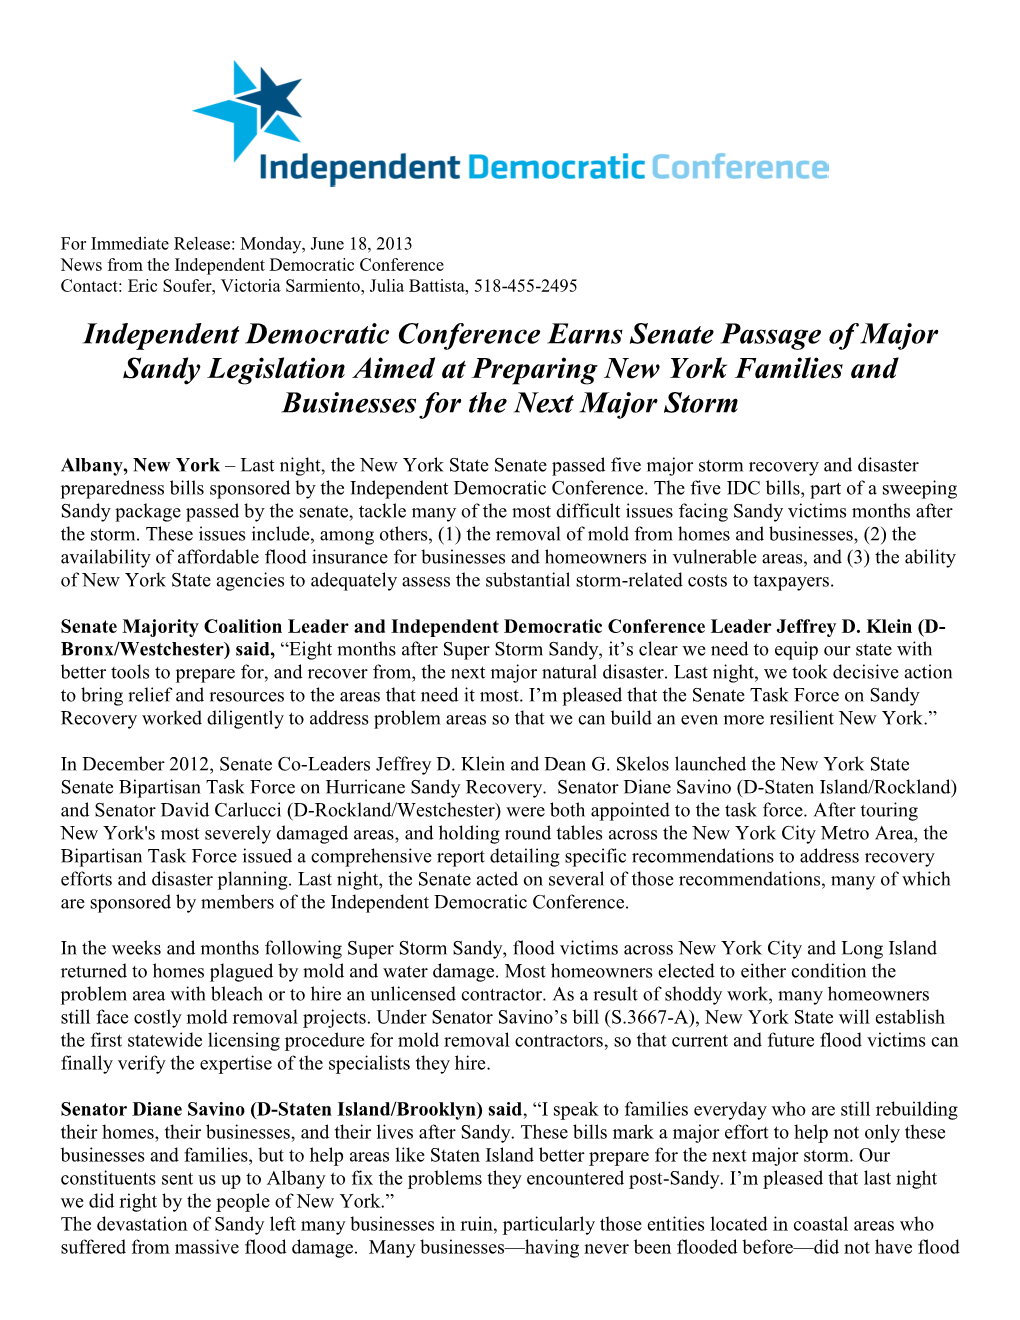 Independent Democratic Conference Earns Senate Passage of Major Sandy Legislation Aimed at Preparing New York Families and Businesses for the Next Major Storm